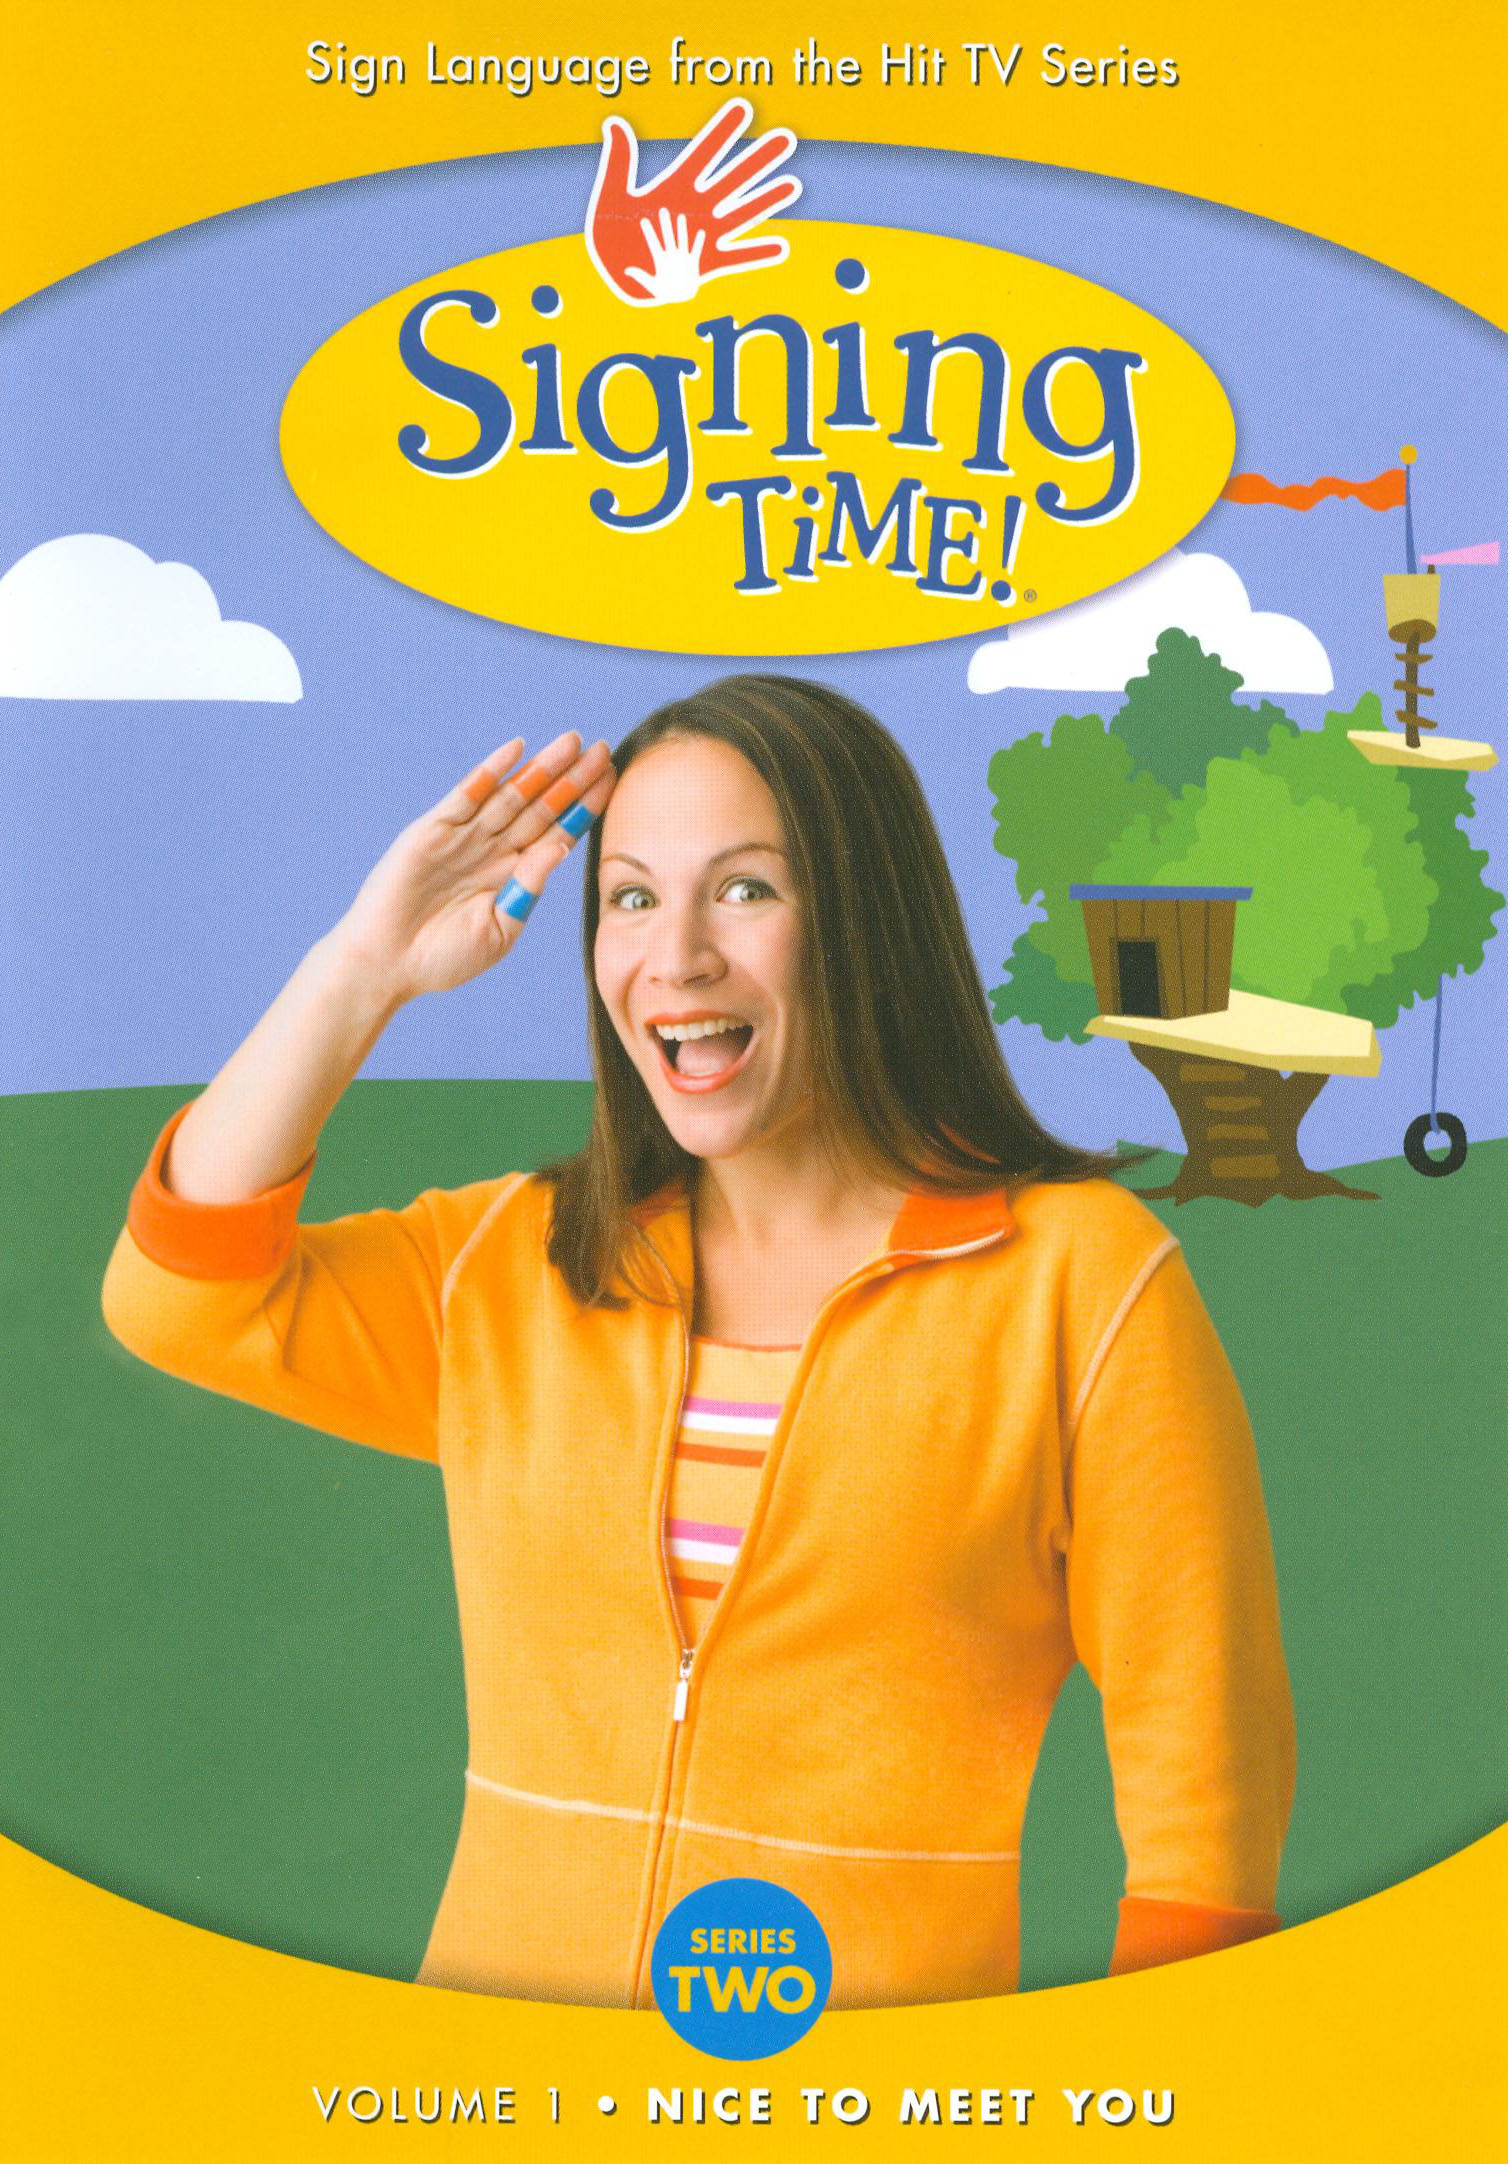 Best Buy: Signing Time!: Series Two, Vol. 1 Nice to Meet You [DVD] [2007]